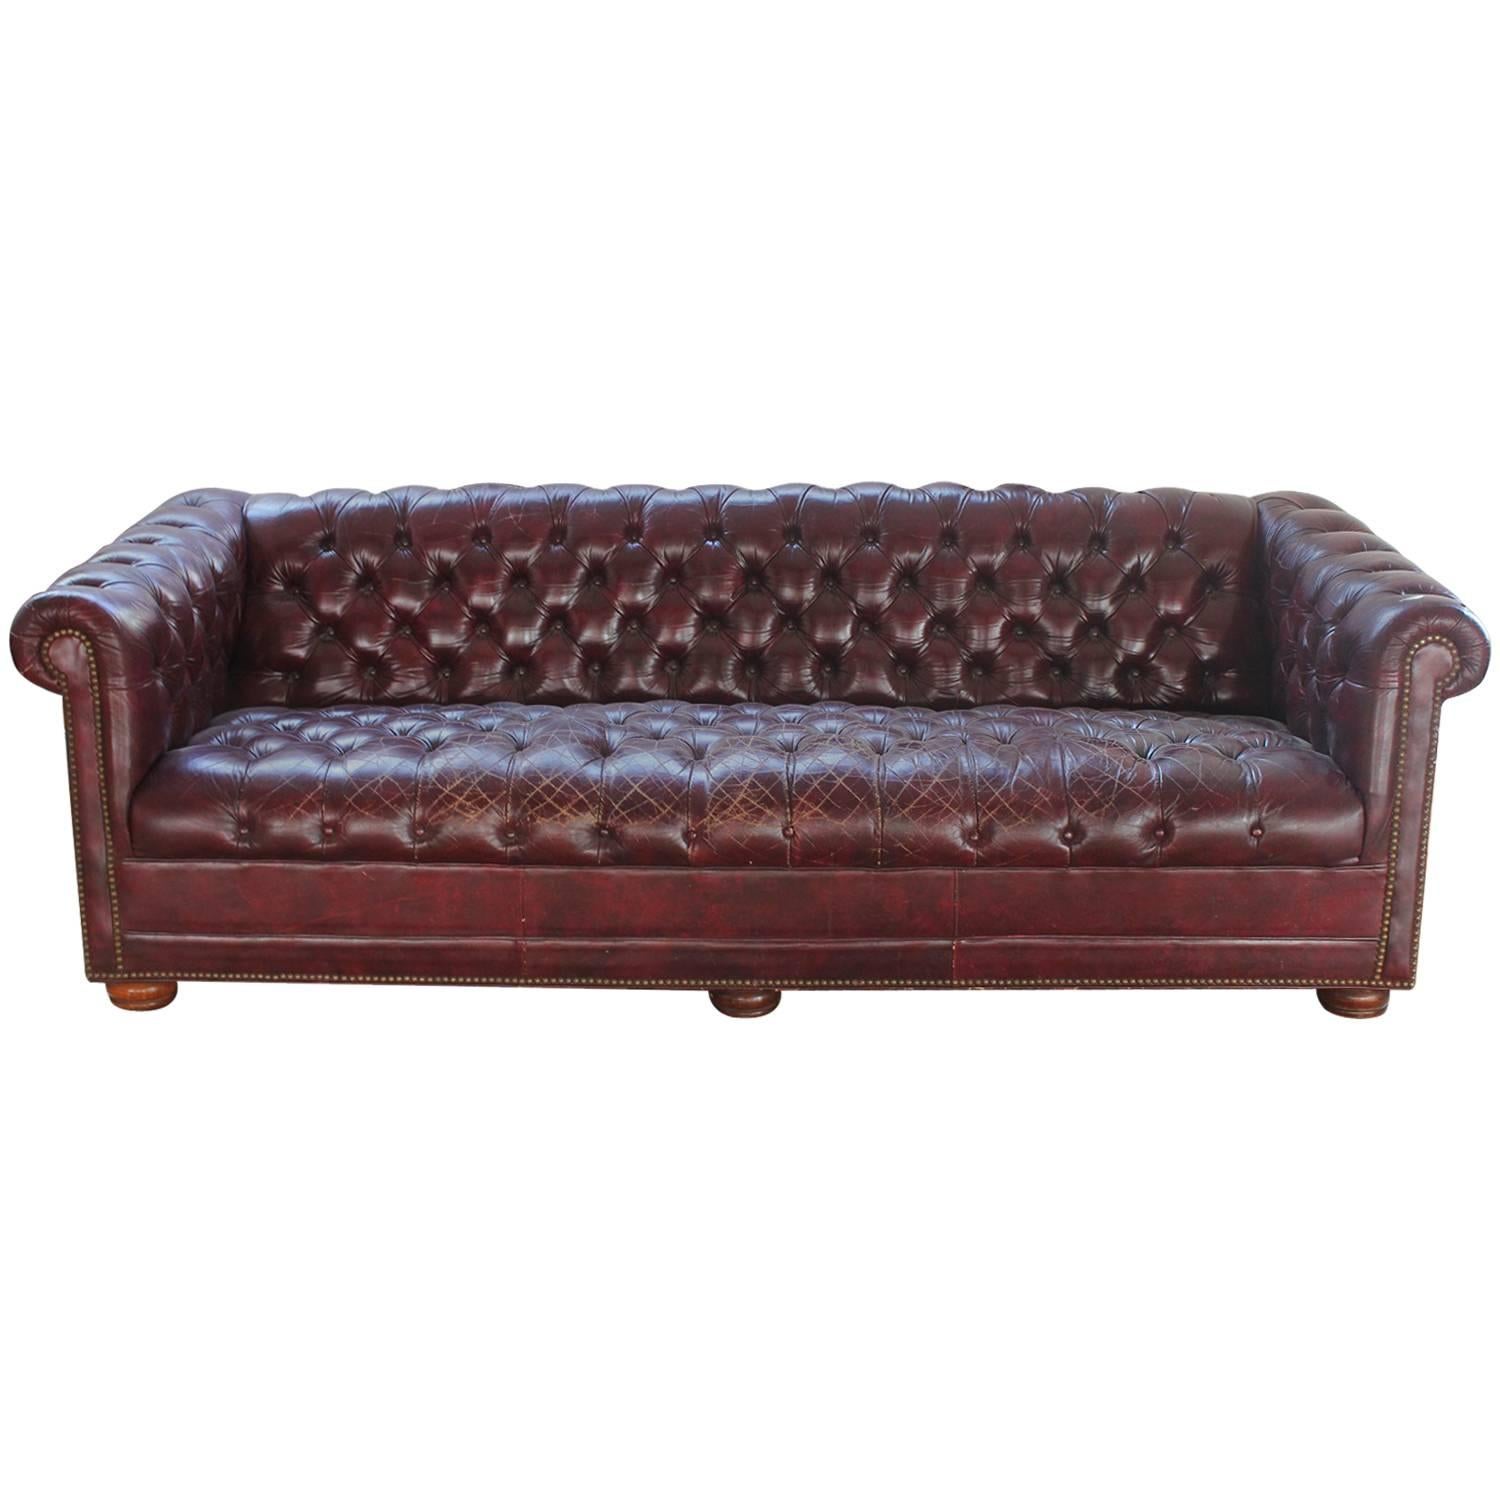 Vintage Distressed Burgundy Leather Chesterfield Sofa For Sale